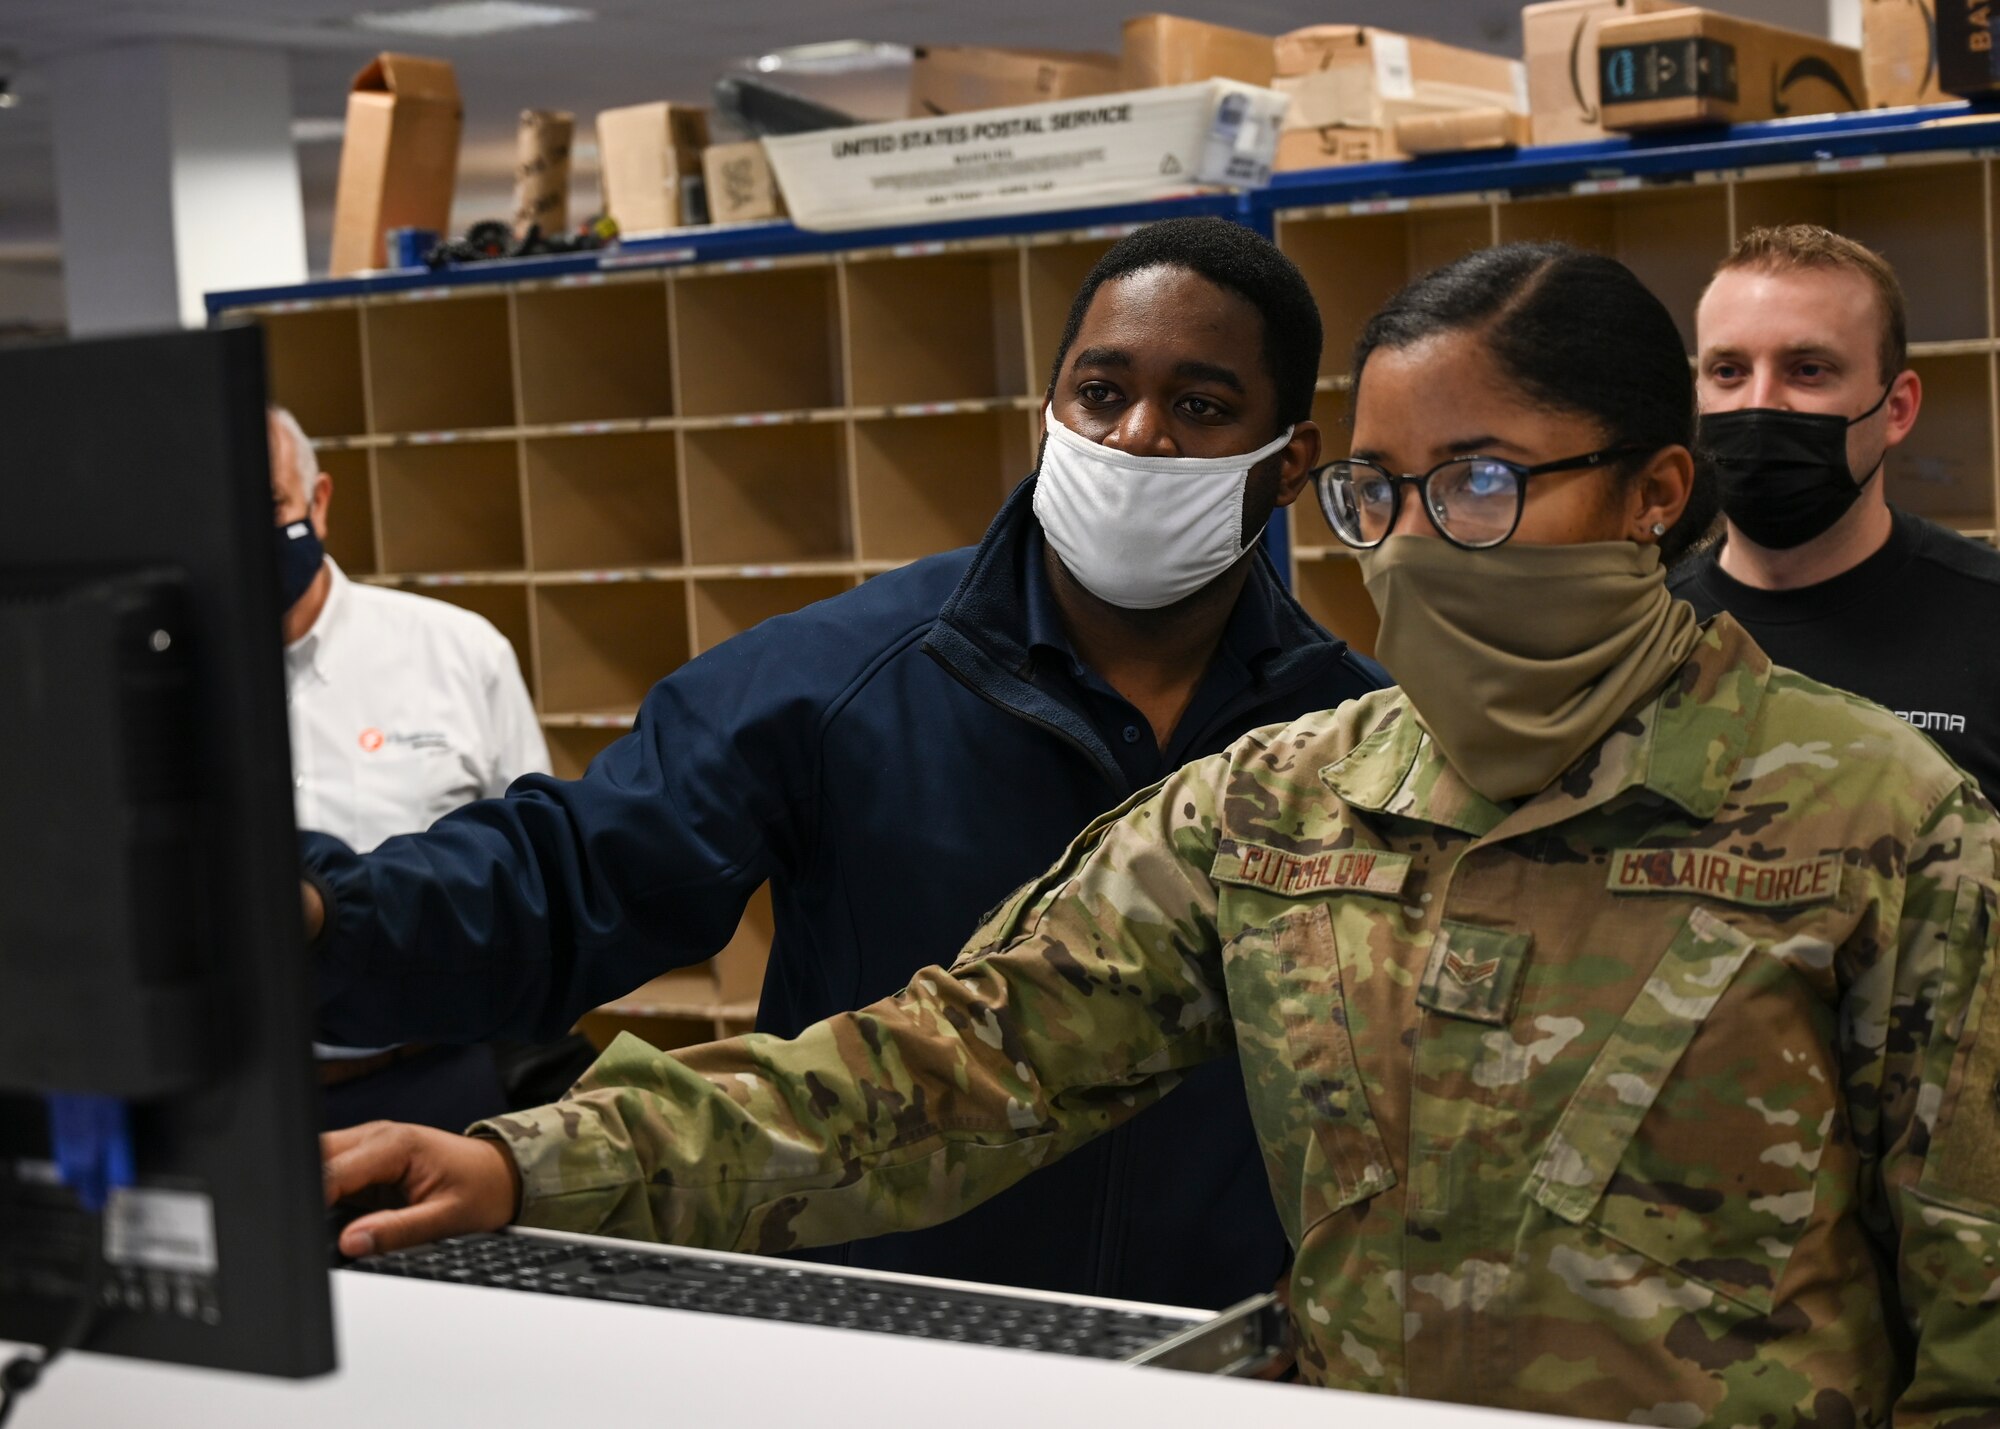 The 786th Force Support Squadron unveiled its new automatic mail sorter at the Northside Post Office at Ramstein Air Base, Germany, Dec. 16.
Leadership from the 786th FSS and 86th Airlift Wing took part in a ribbon cutting ceremony introducing the new equipment.